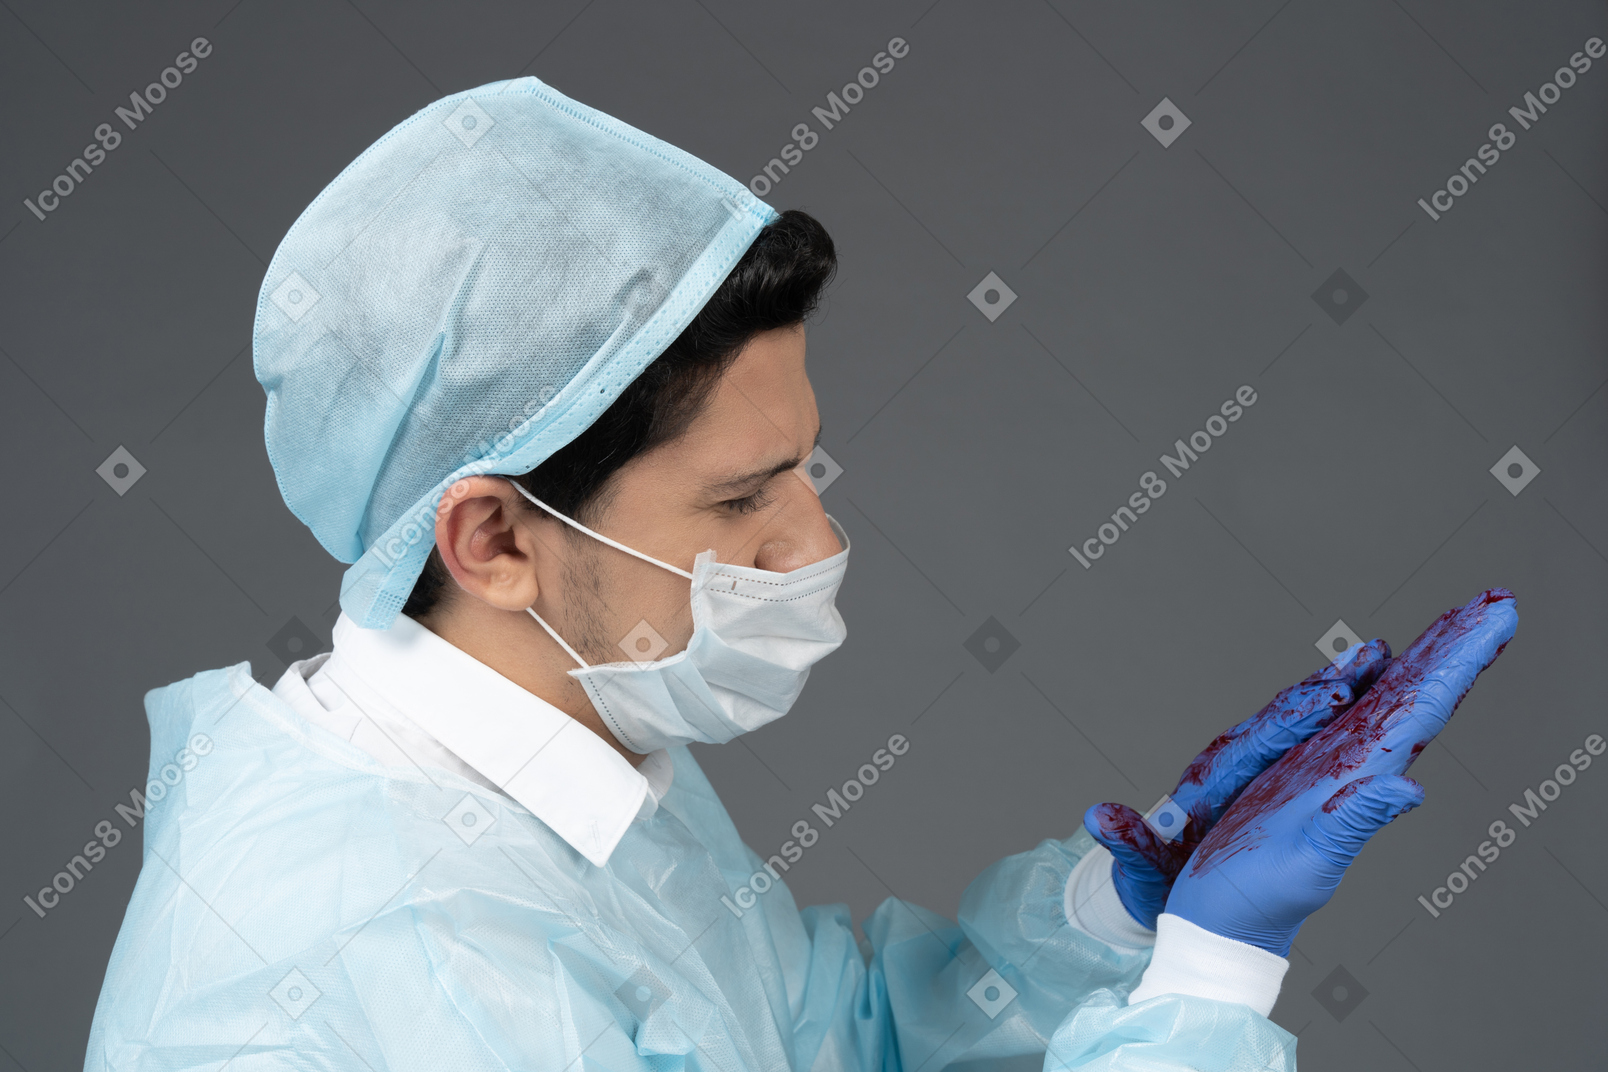 Doctor's hands covered in blood